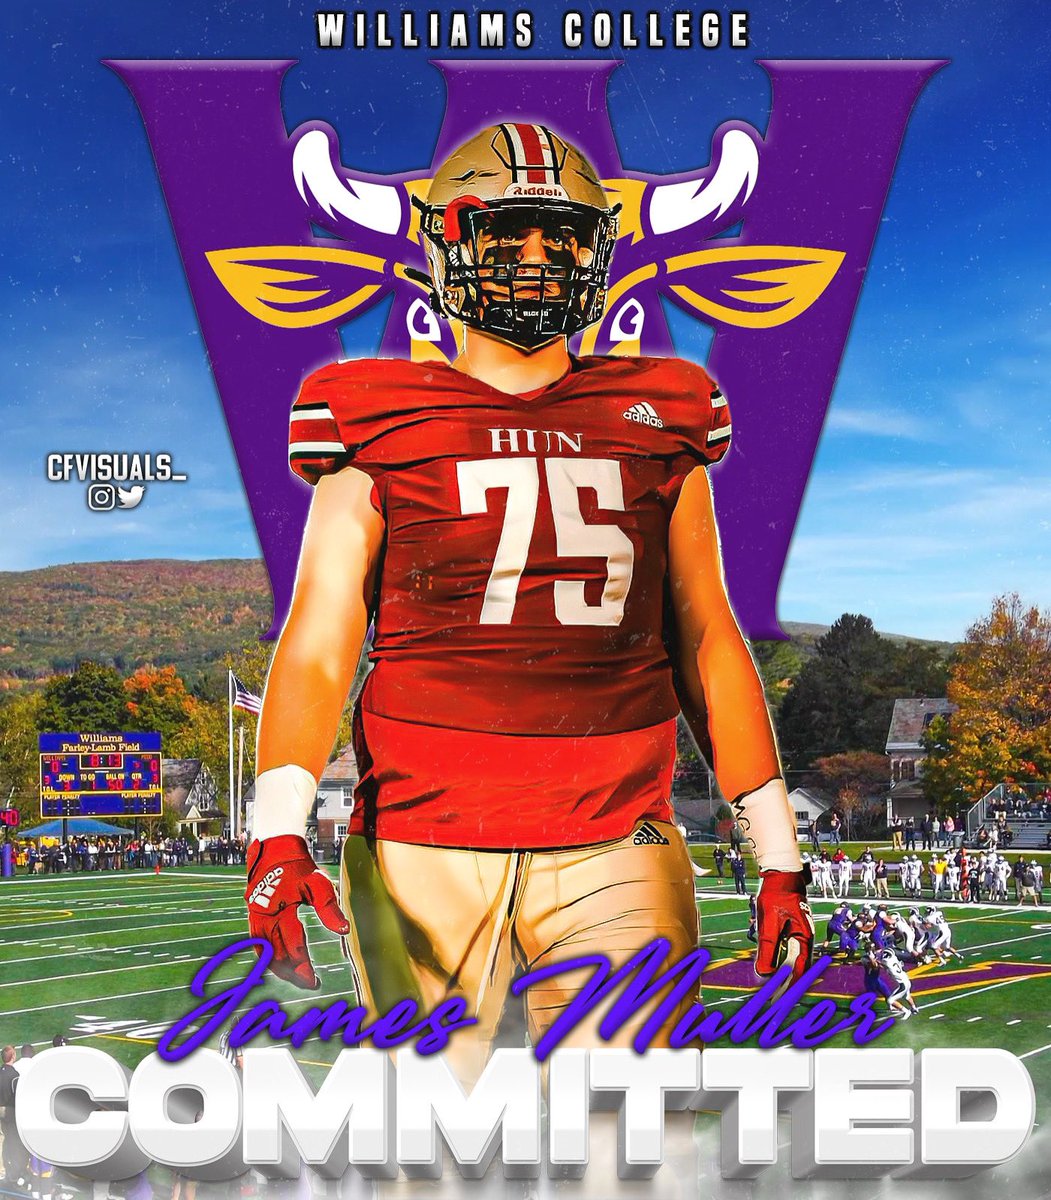 Excited to announce my commitment to Williams College! Thank you to my parents, teammates, and coaches for a great 4 years at Hun! Go Ephs! 🟪🟨 @Red_Zone75 @Tonyrazz03 @CoachHennessey @Coach_MMac @WilliamsEphsFB @AlinementSC @GoMVB #HunFootball